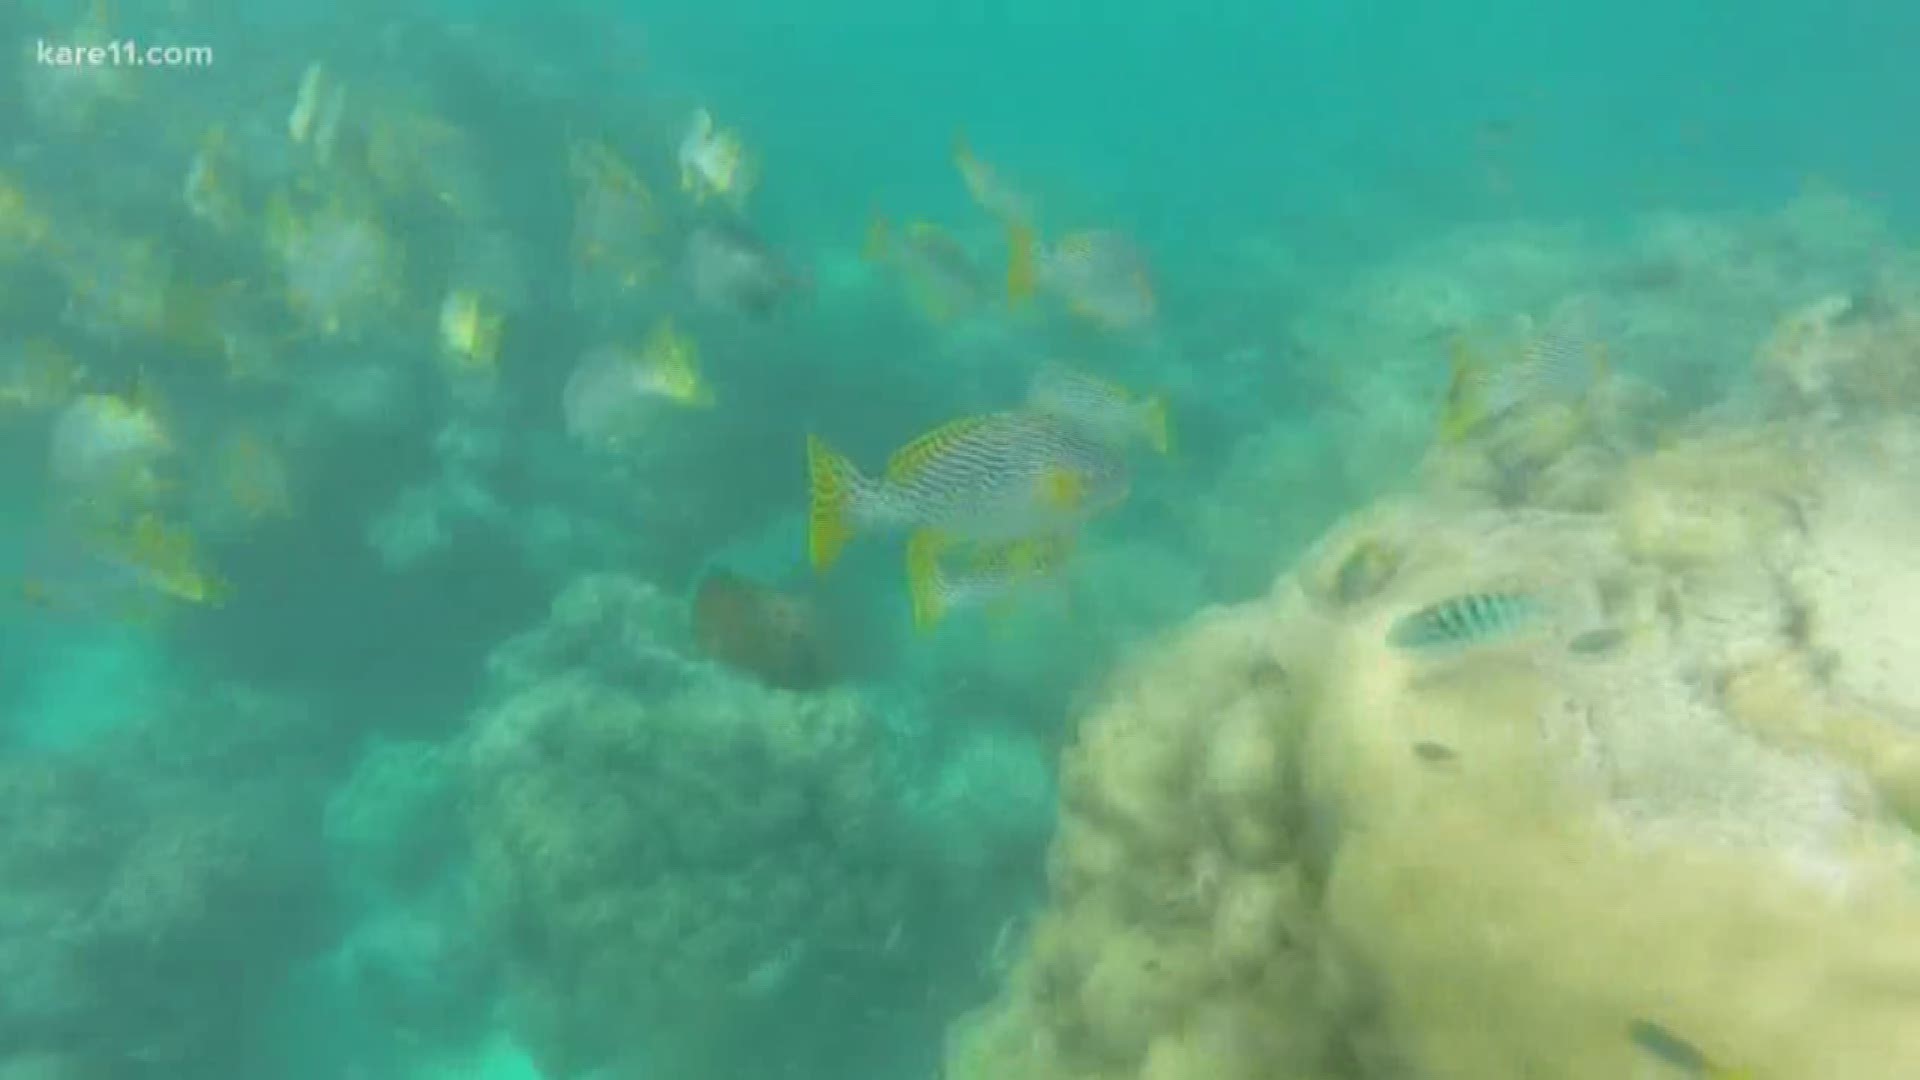 Sven explores the diversity of marine life at the Great Barrier Reef near Australia.